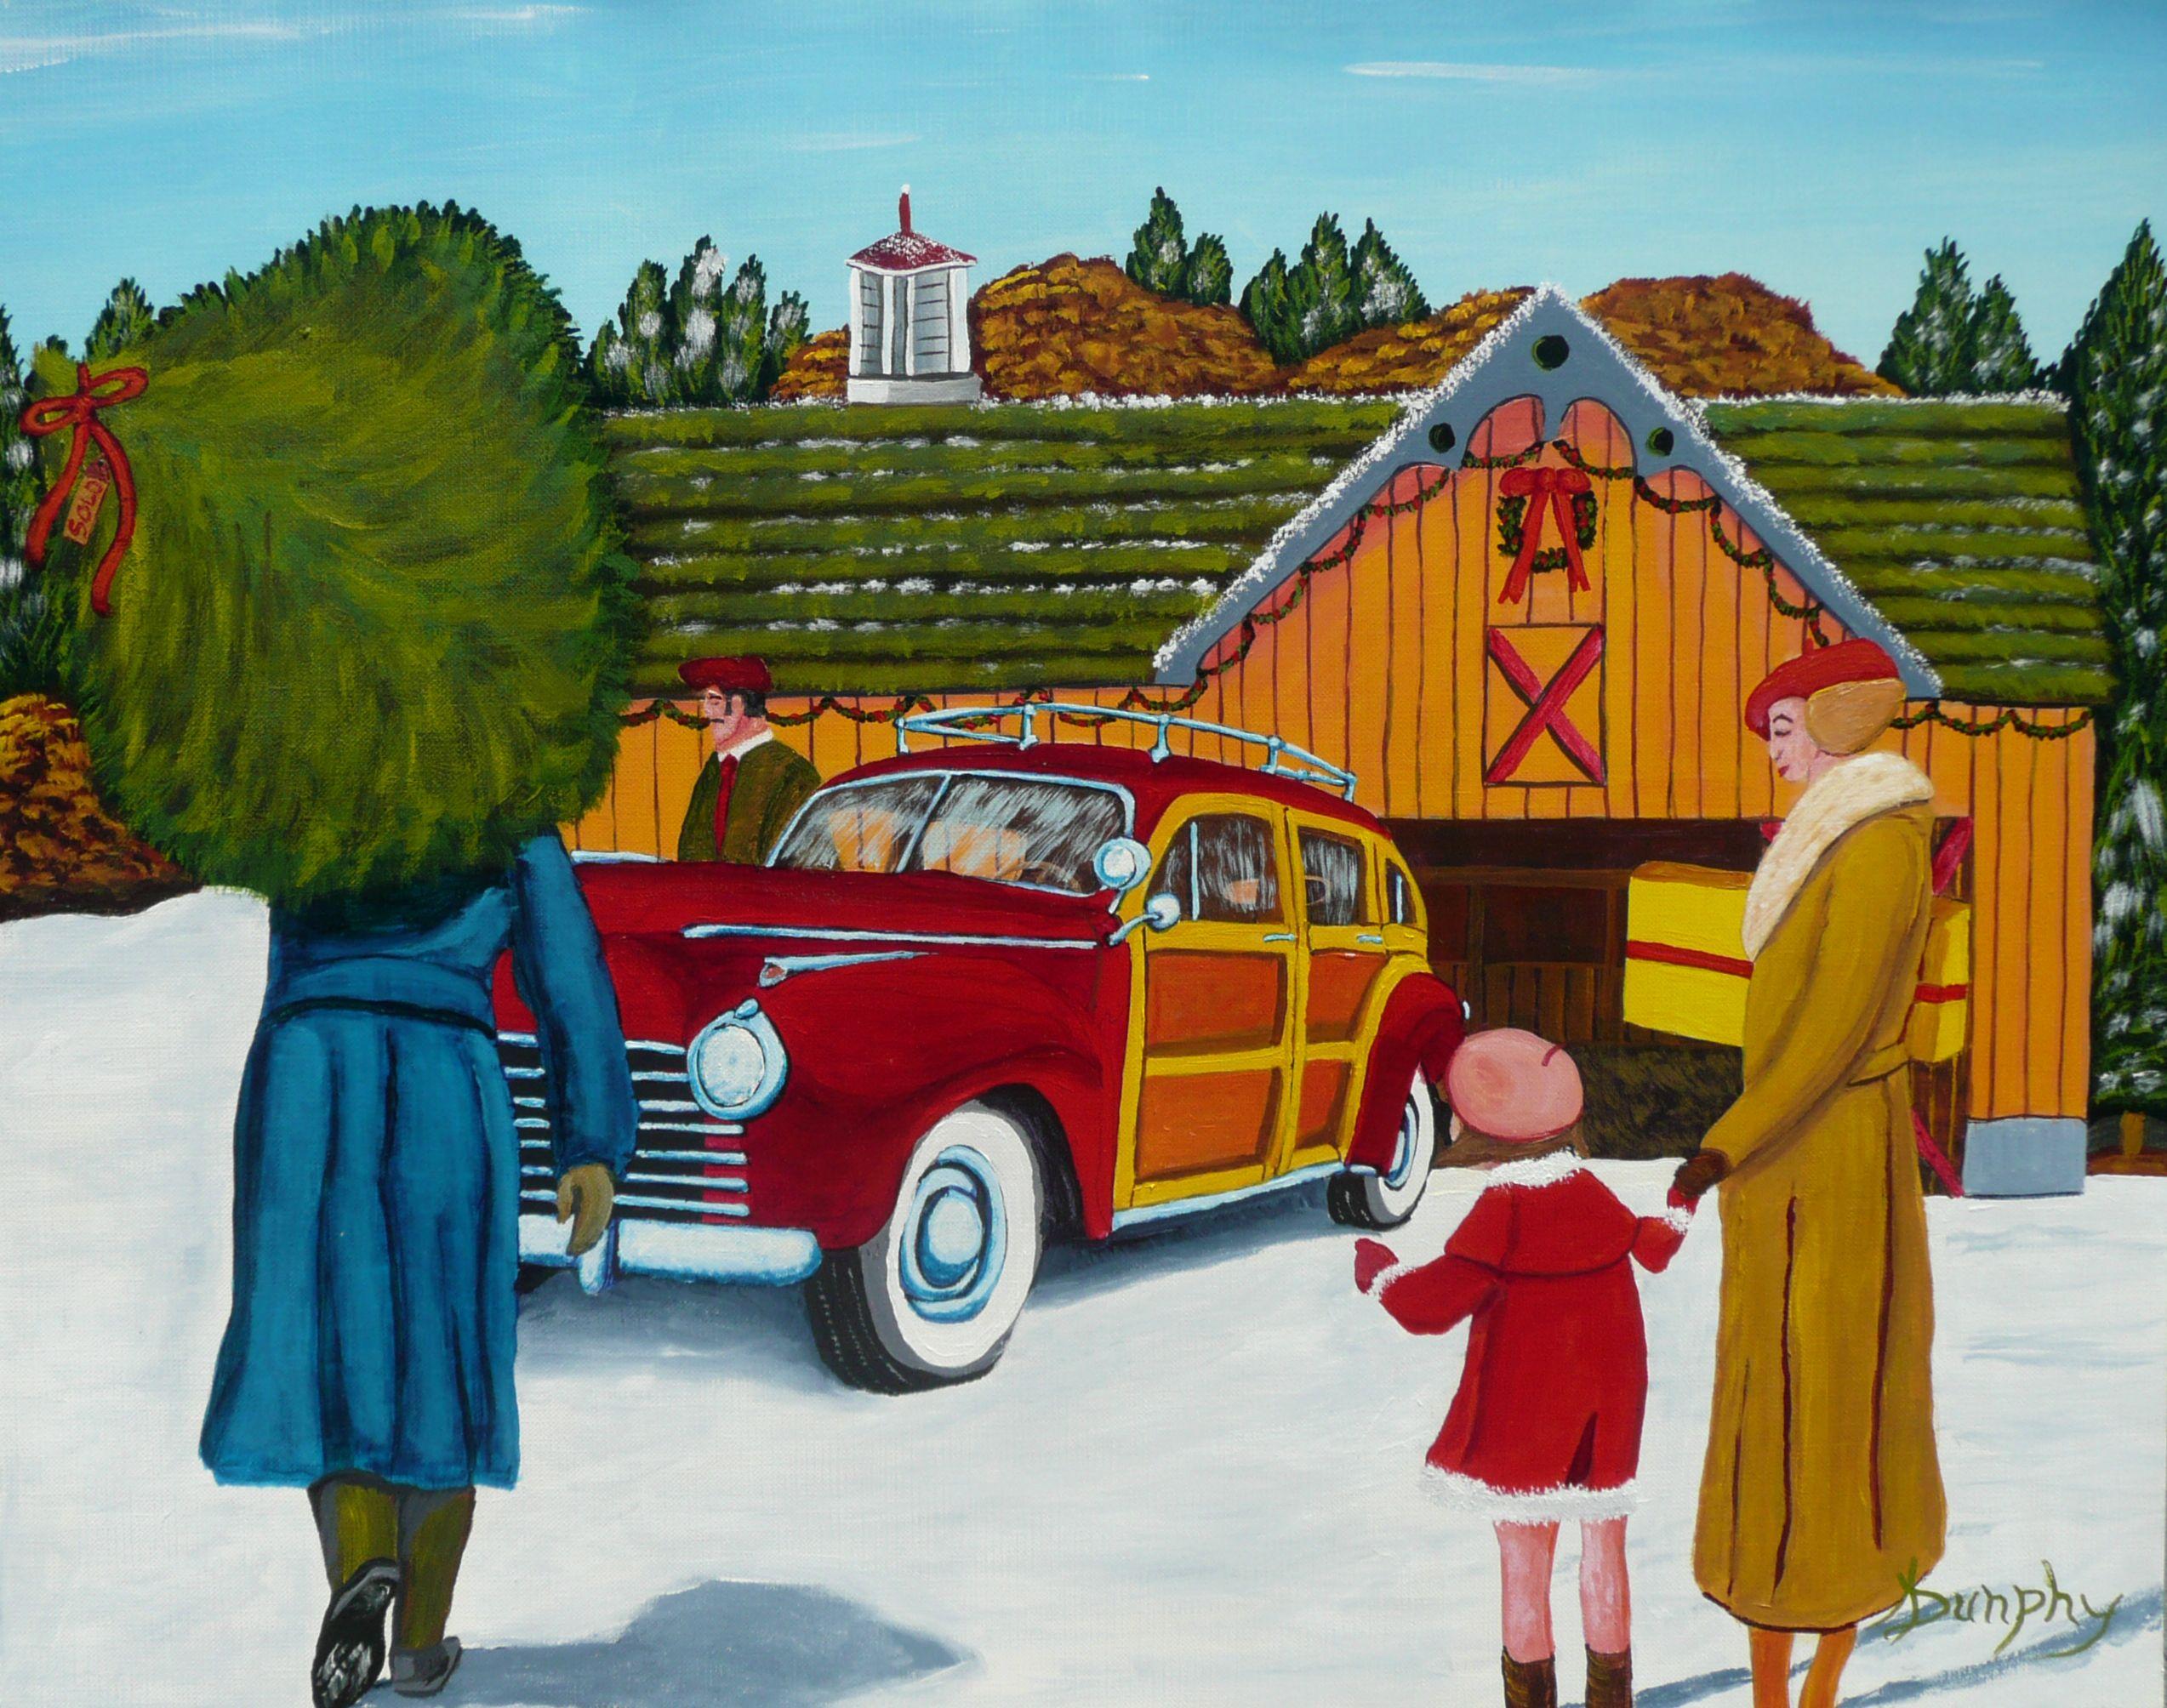 Just before Christmas the whole family gets in the car to head to the county to get a tree for the house. This is a nostalgic piece so I painted it in the old style to capture the feel of an old time Christmas card.     This painting has been